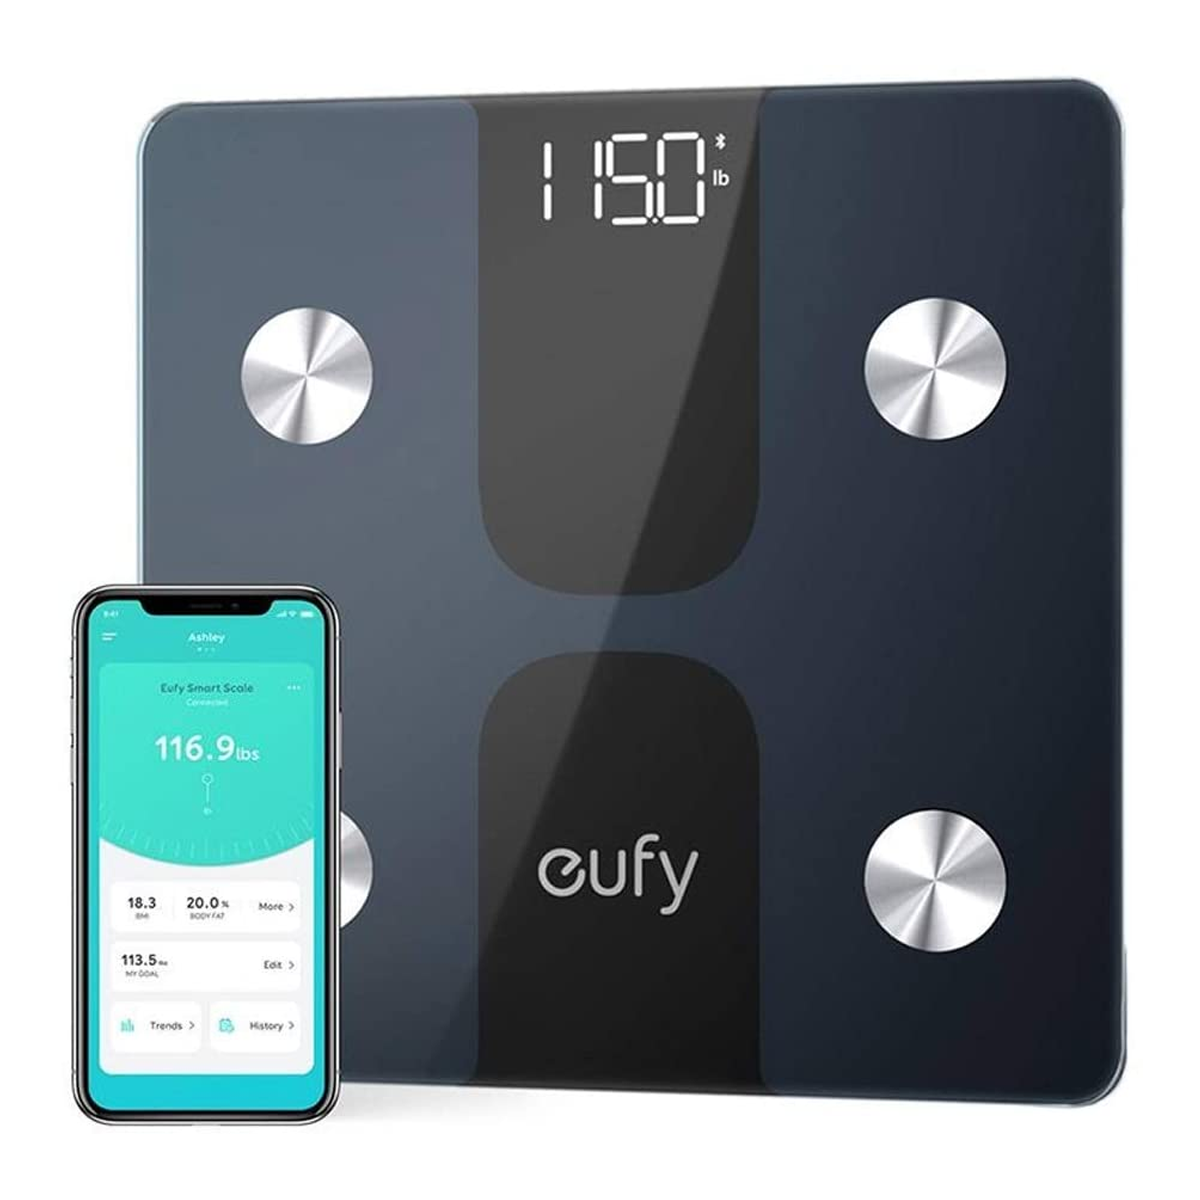 Eufy Smart Scale C1 with Bluetooth 4.2 T9146H11 - Black